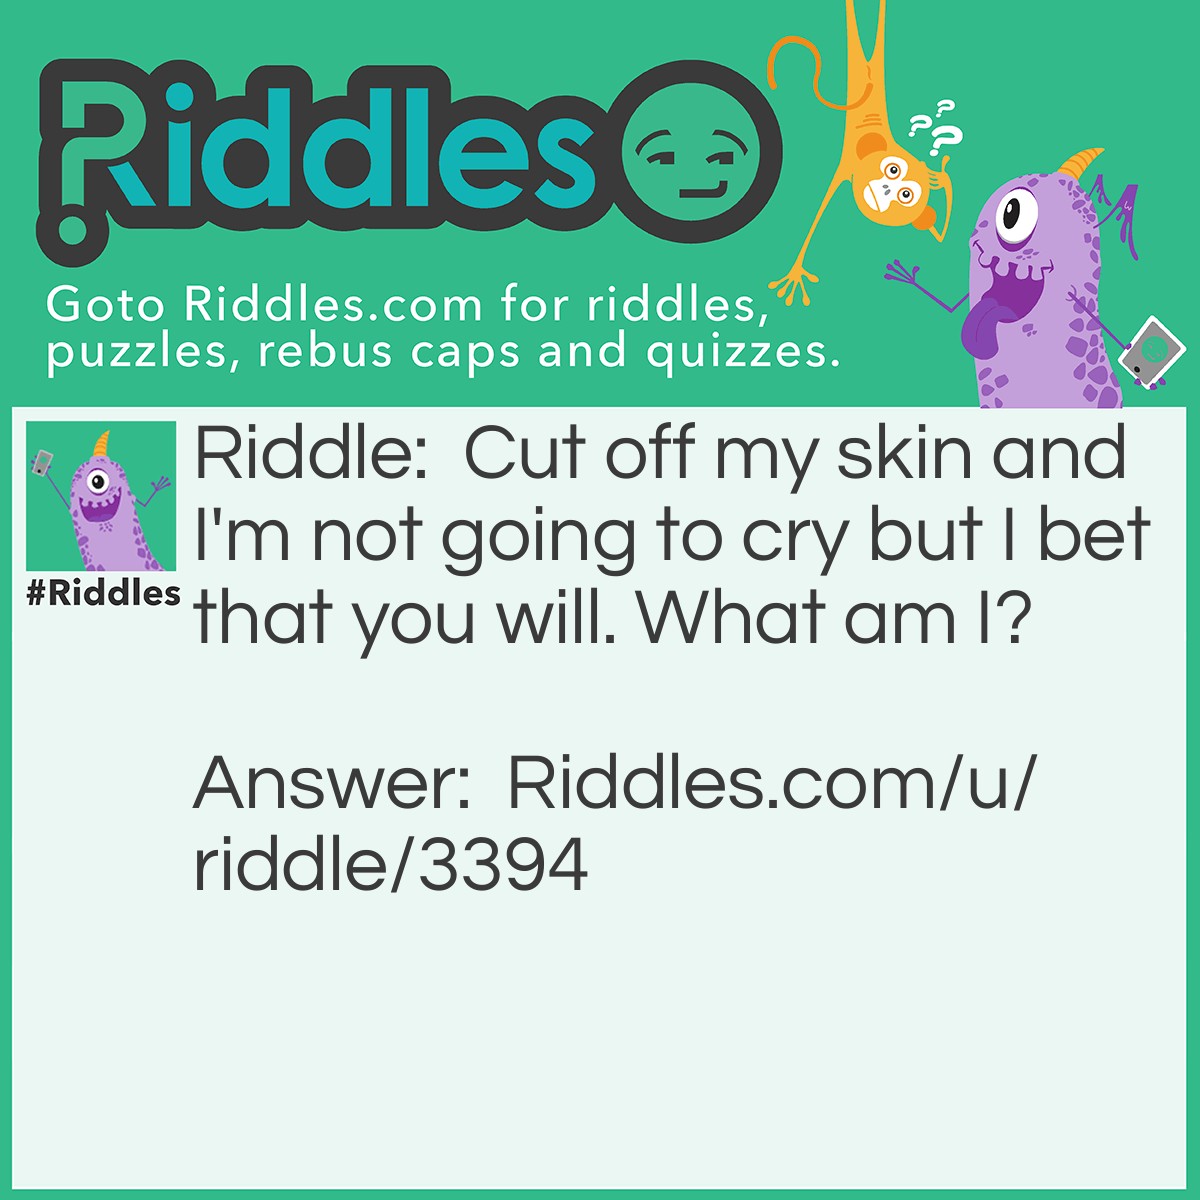 Riddle: Cut off my skin and I'm not going to cry but I bet that you will. What am I? Answer: An onion.